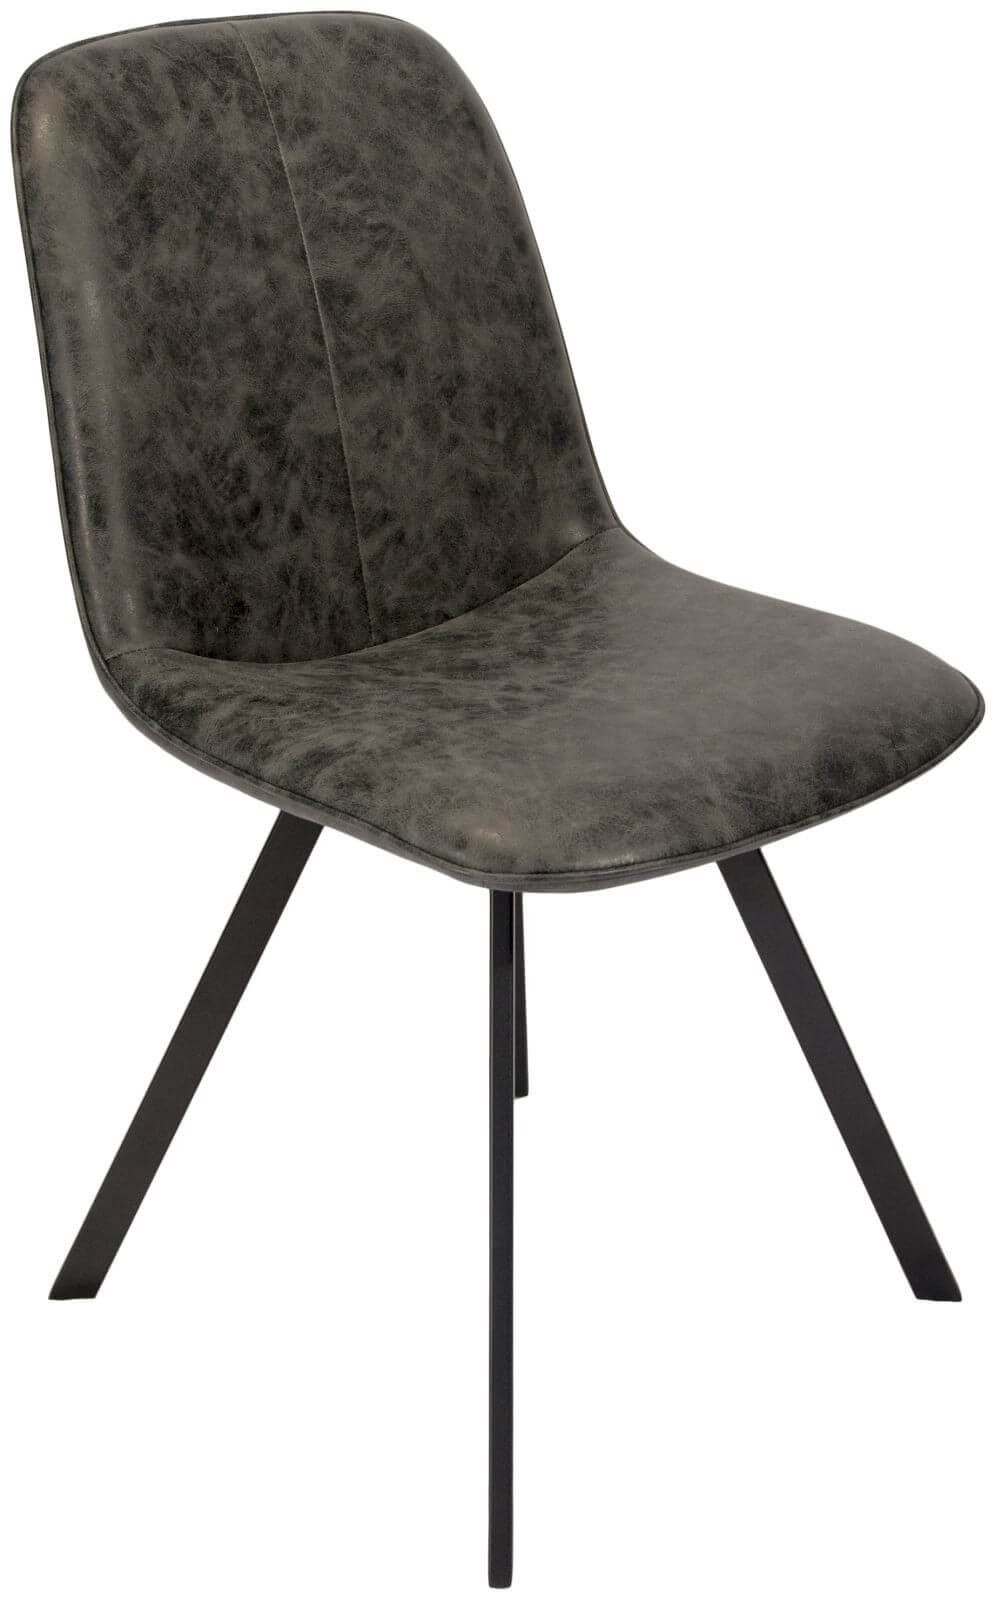 Showing image for Fengo dining chair